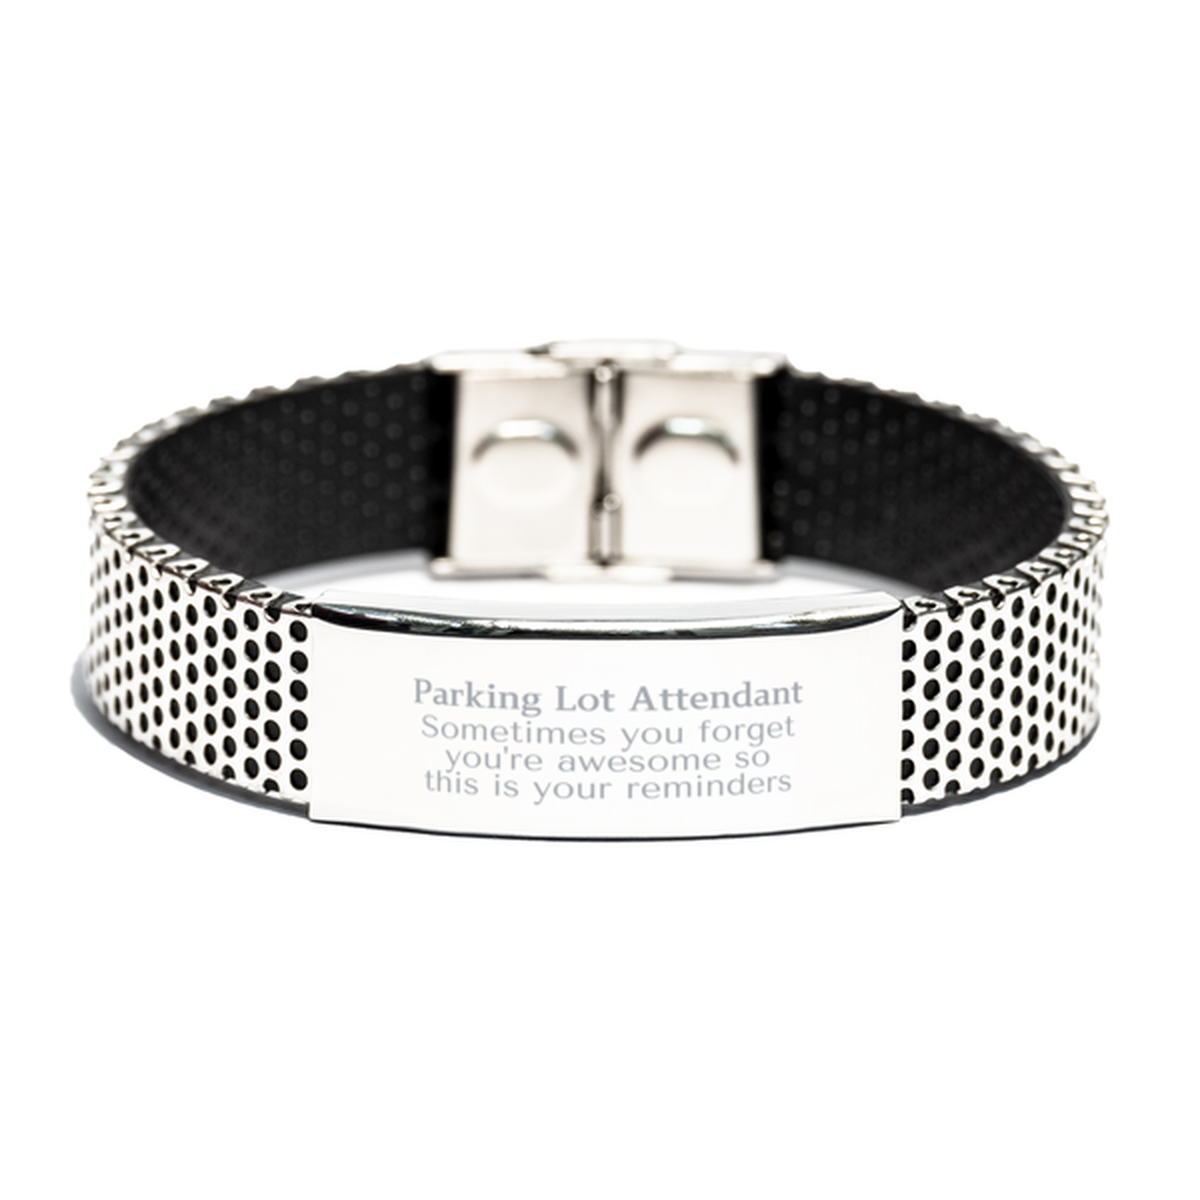 Sentimental Parking Lot Attendant Stainless Steel Bracelet, Parking Lot Attendant Sometimes you forget you're awesome so this is your reminders, Graduation Christmas Birthday Gifts for Parking Lot Attendant, Men, Women, Coworkers